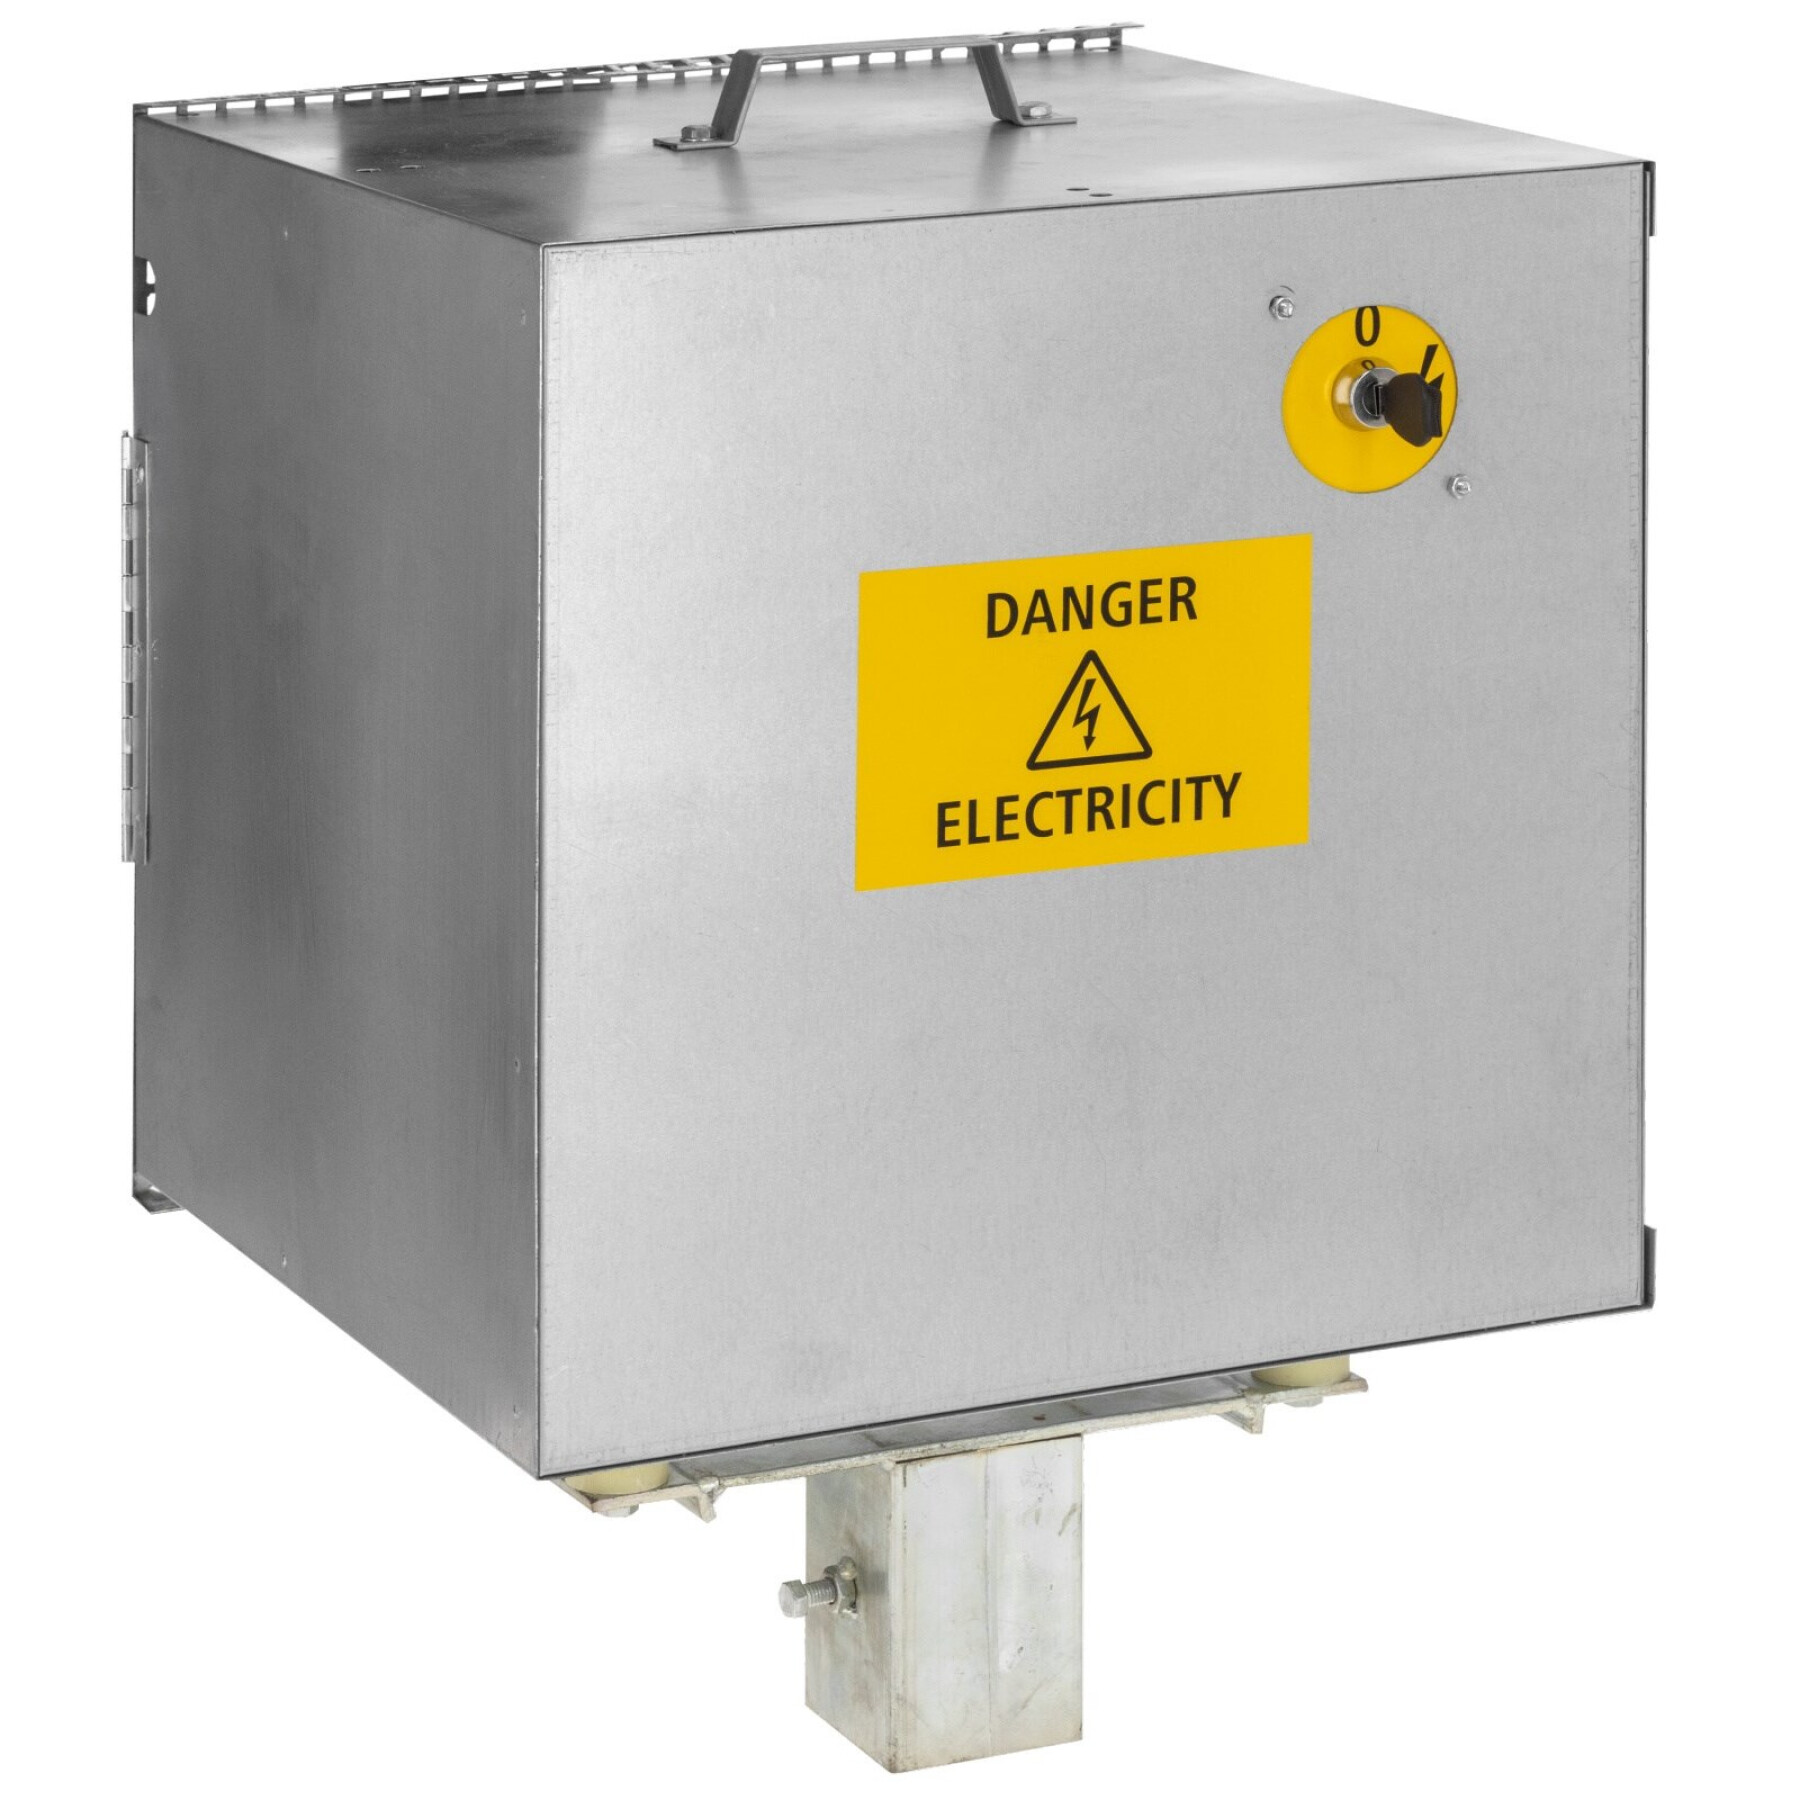 Anti-theft galvanized steel electrical box for 12v substation Ako